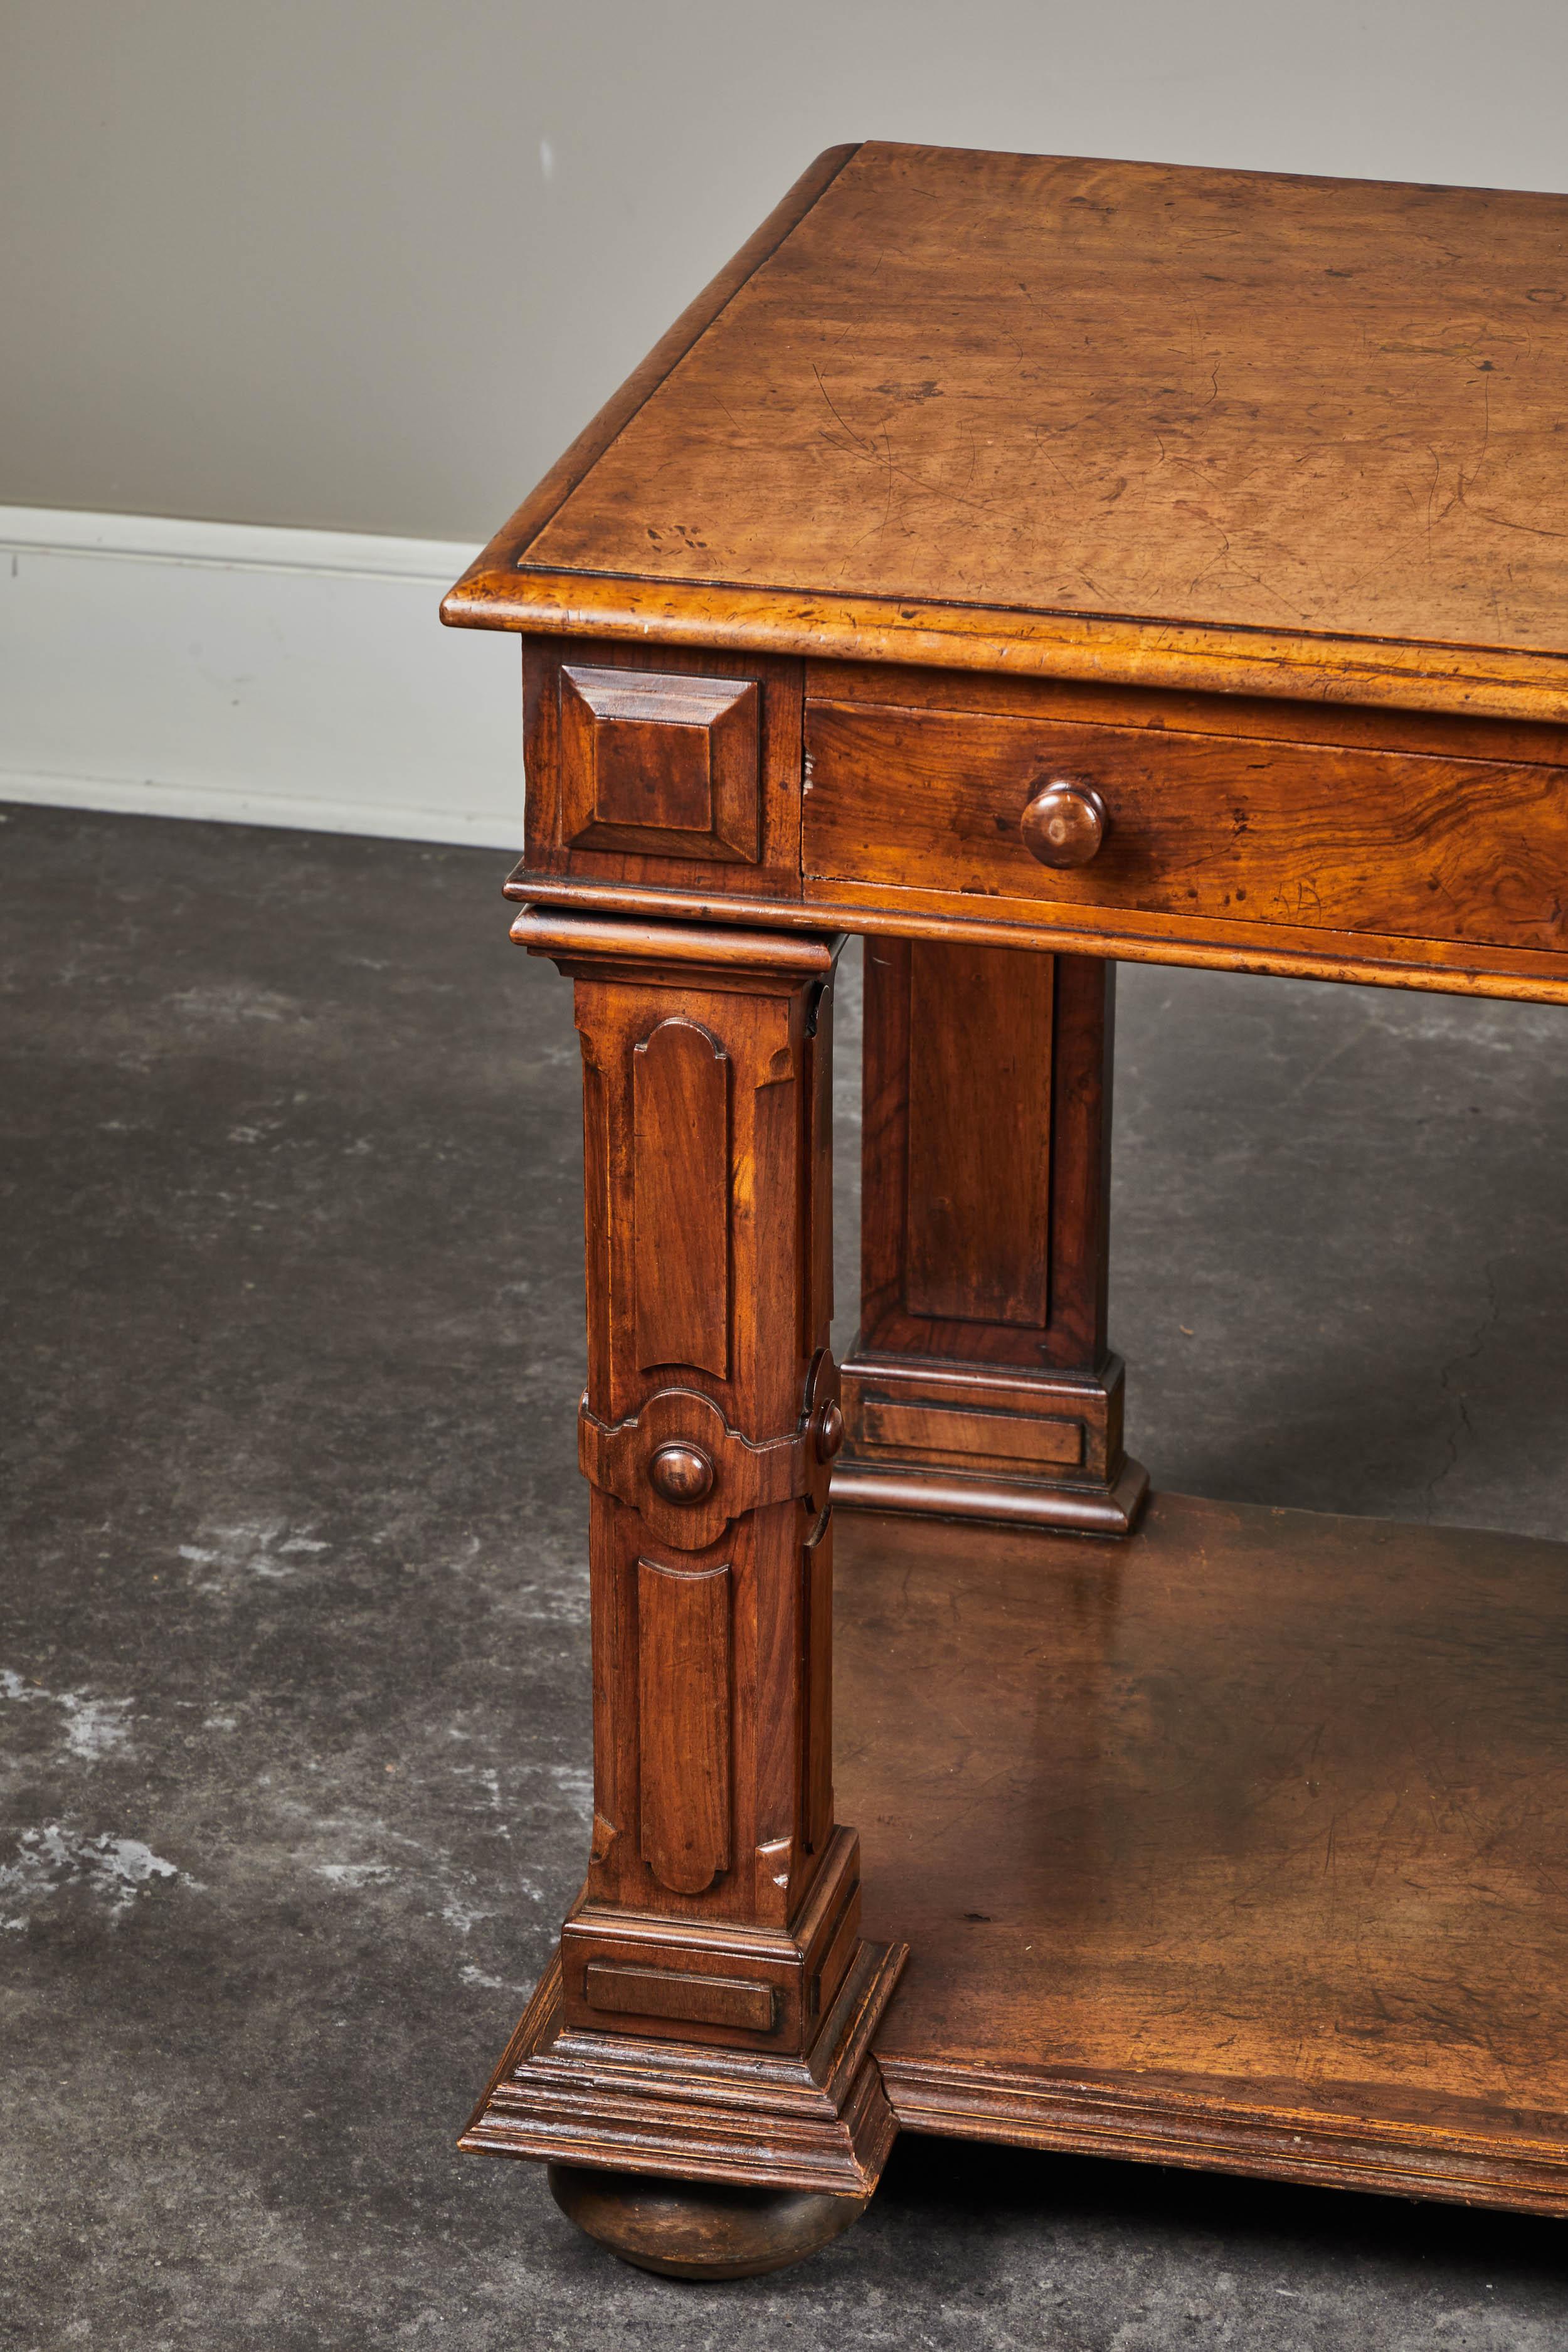 2 Drawer supported by four Baronial-Style legs with lower shelf.